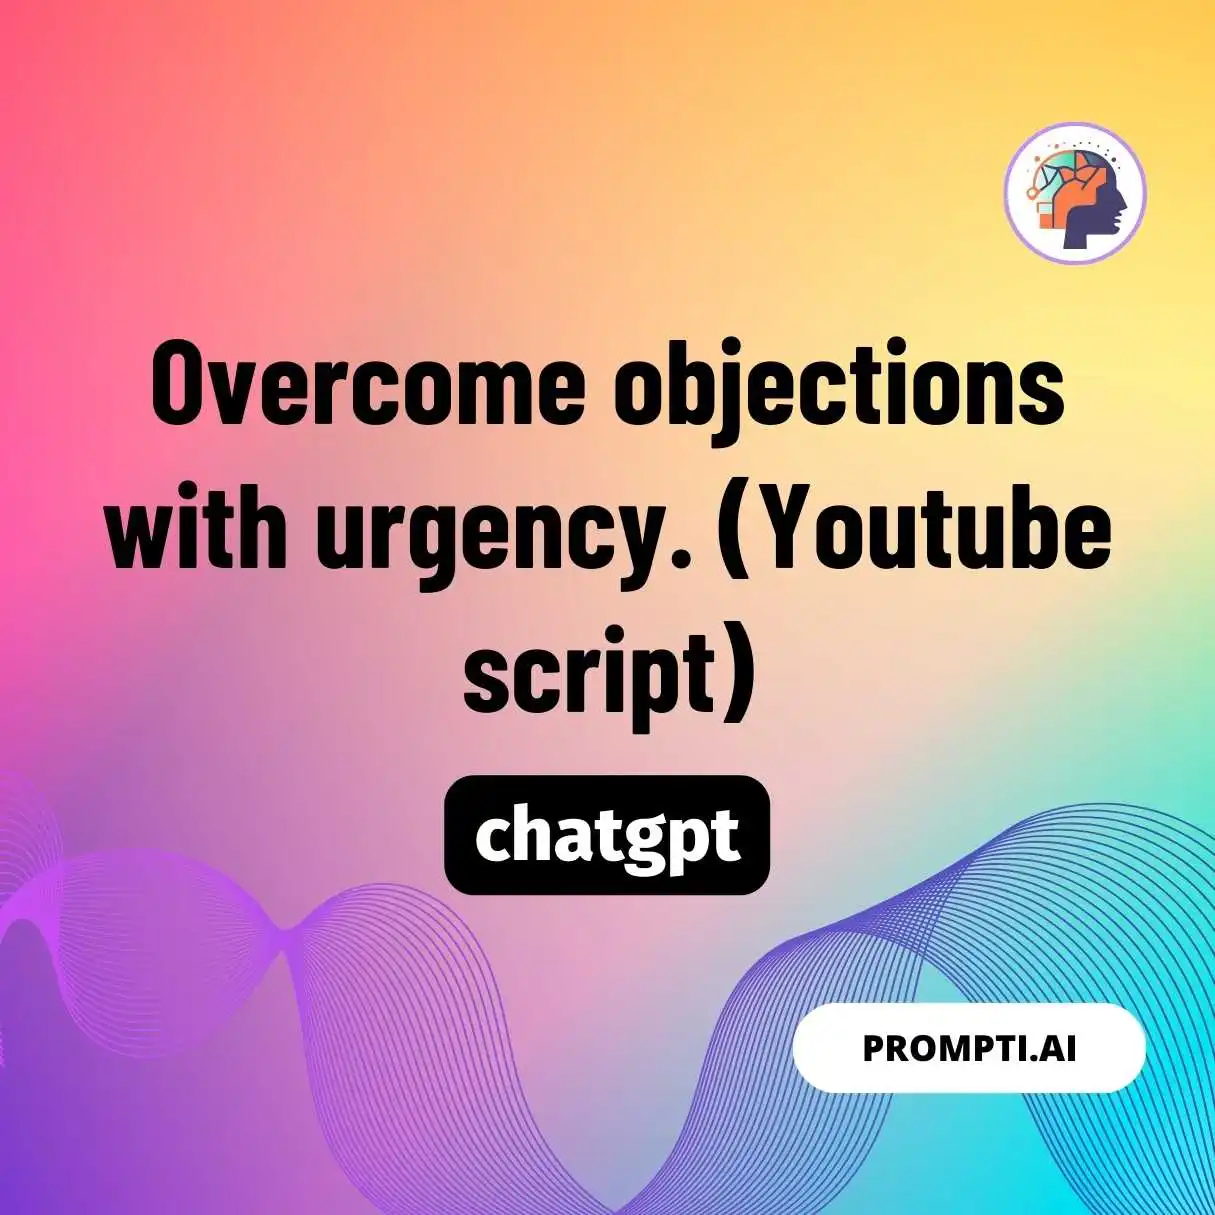 Overcome objections with urgency. (Youtube script)